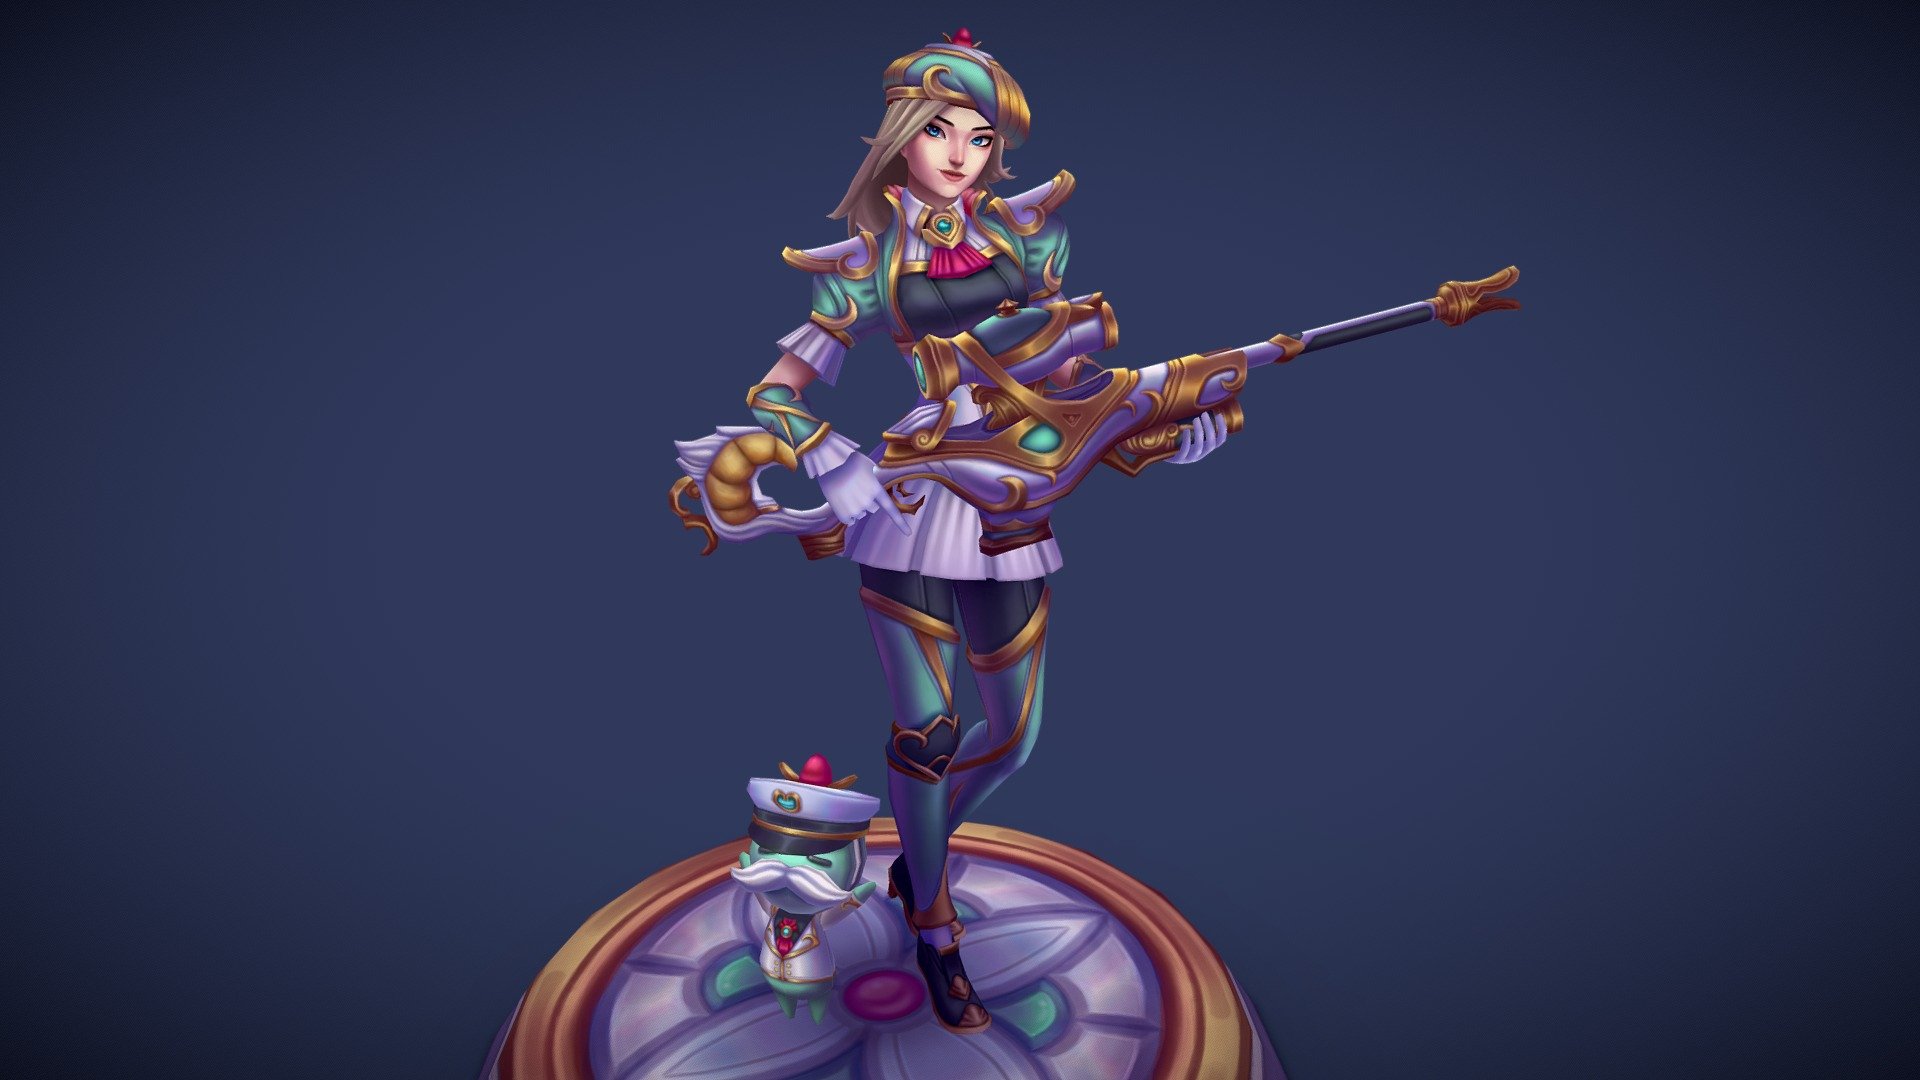 Recently finished up my latest League fan model!
Check it out on Artstation: https://www.artstation.com/artwork/xY1lem

Big thanks to Lawrence Hong for letting me use his Cafe Cuties Caitlyn concept.
Original Concept: https://www.artstation.com/artwork/mzw341 - Cafe Cuties Caitlyn - 3D model by Dechta 3d model